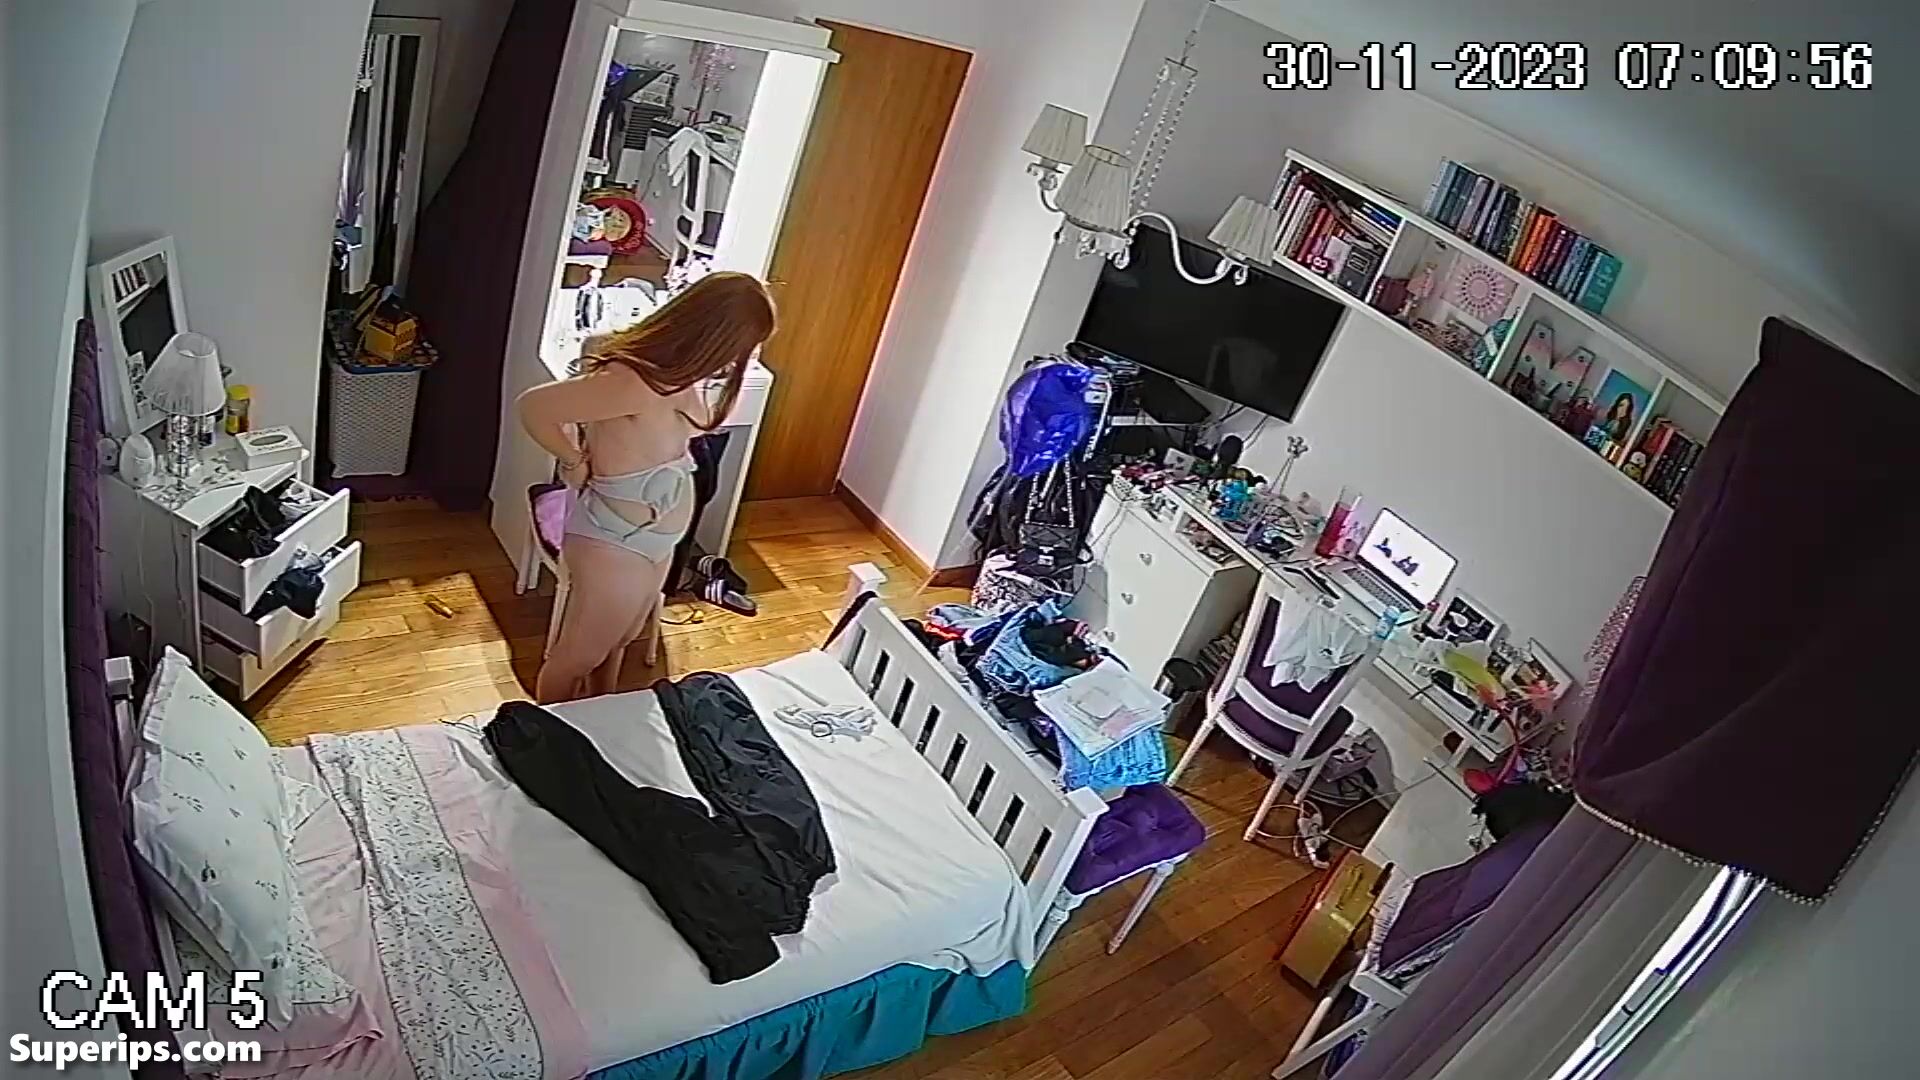 Busty redhead girl changes clothes in her room